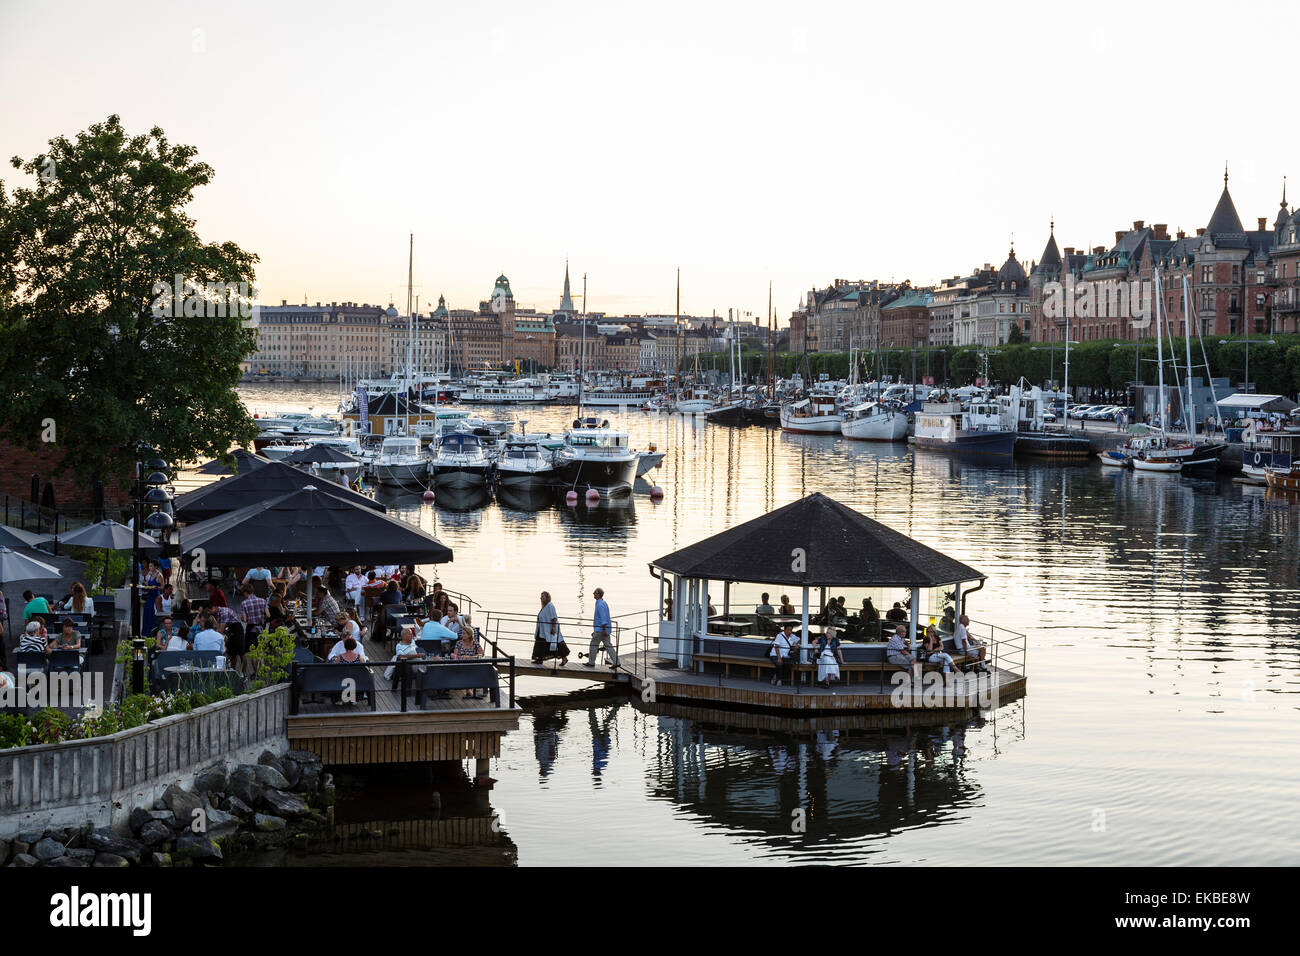 View over the buildings and boats along Strandvagen street, Stockholm, Sweden, Scandinavia, Europe Stock Photo